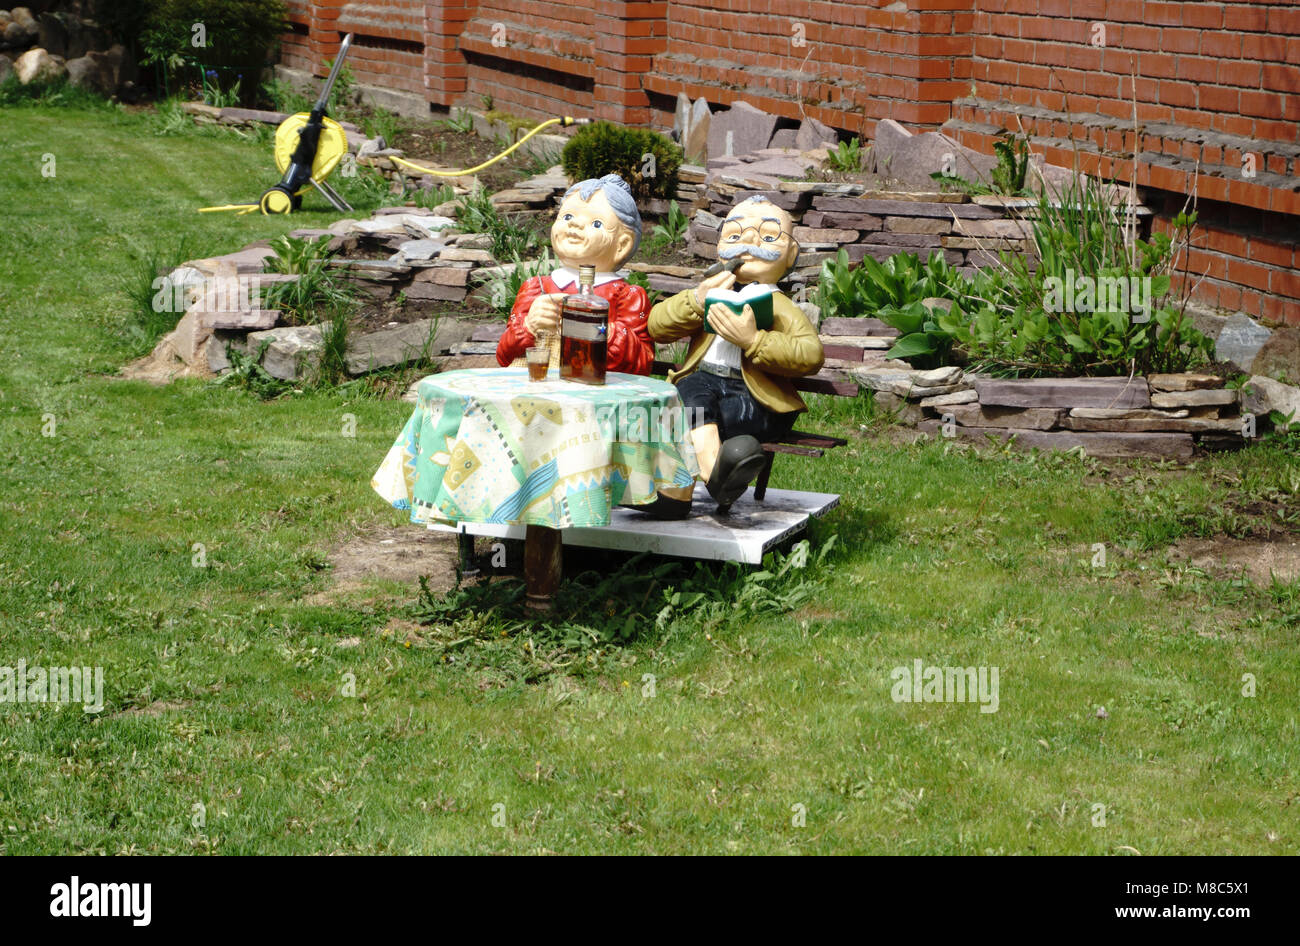 The wooden figure of the person for decoration of a garden or giving Stock Photo